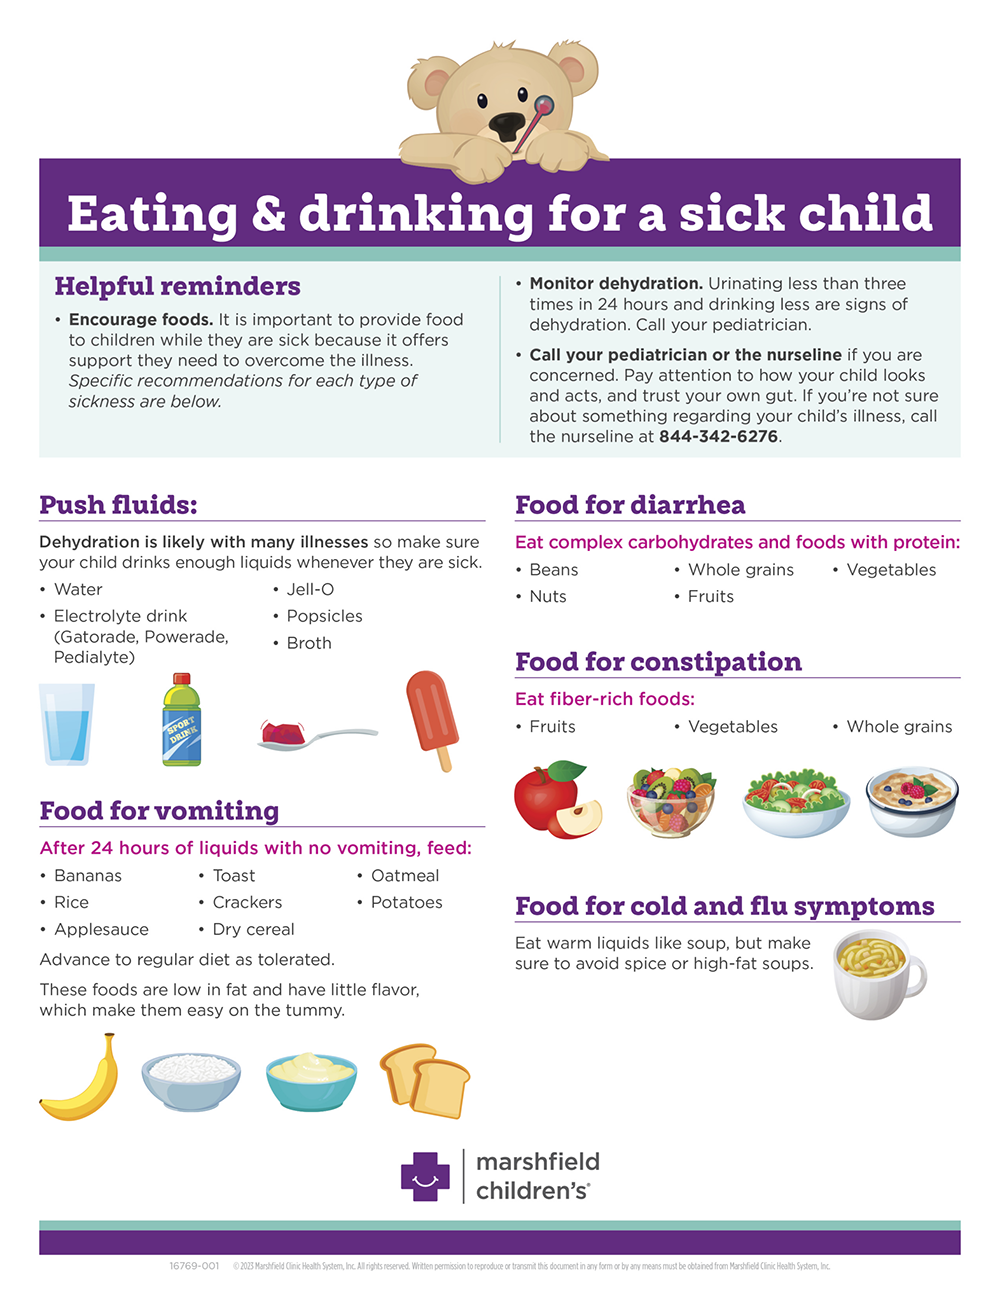 Visual chart about feeding and caring for a sick child